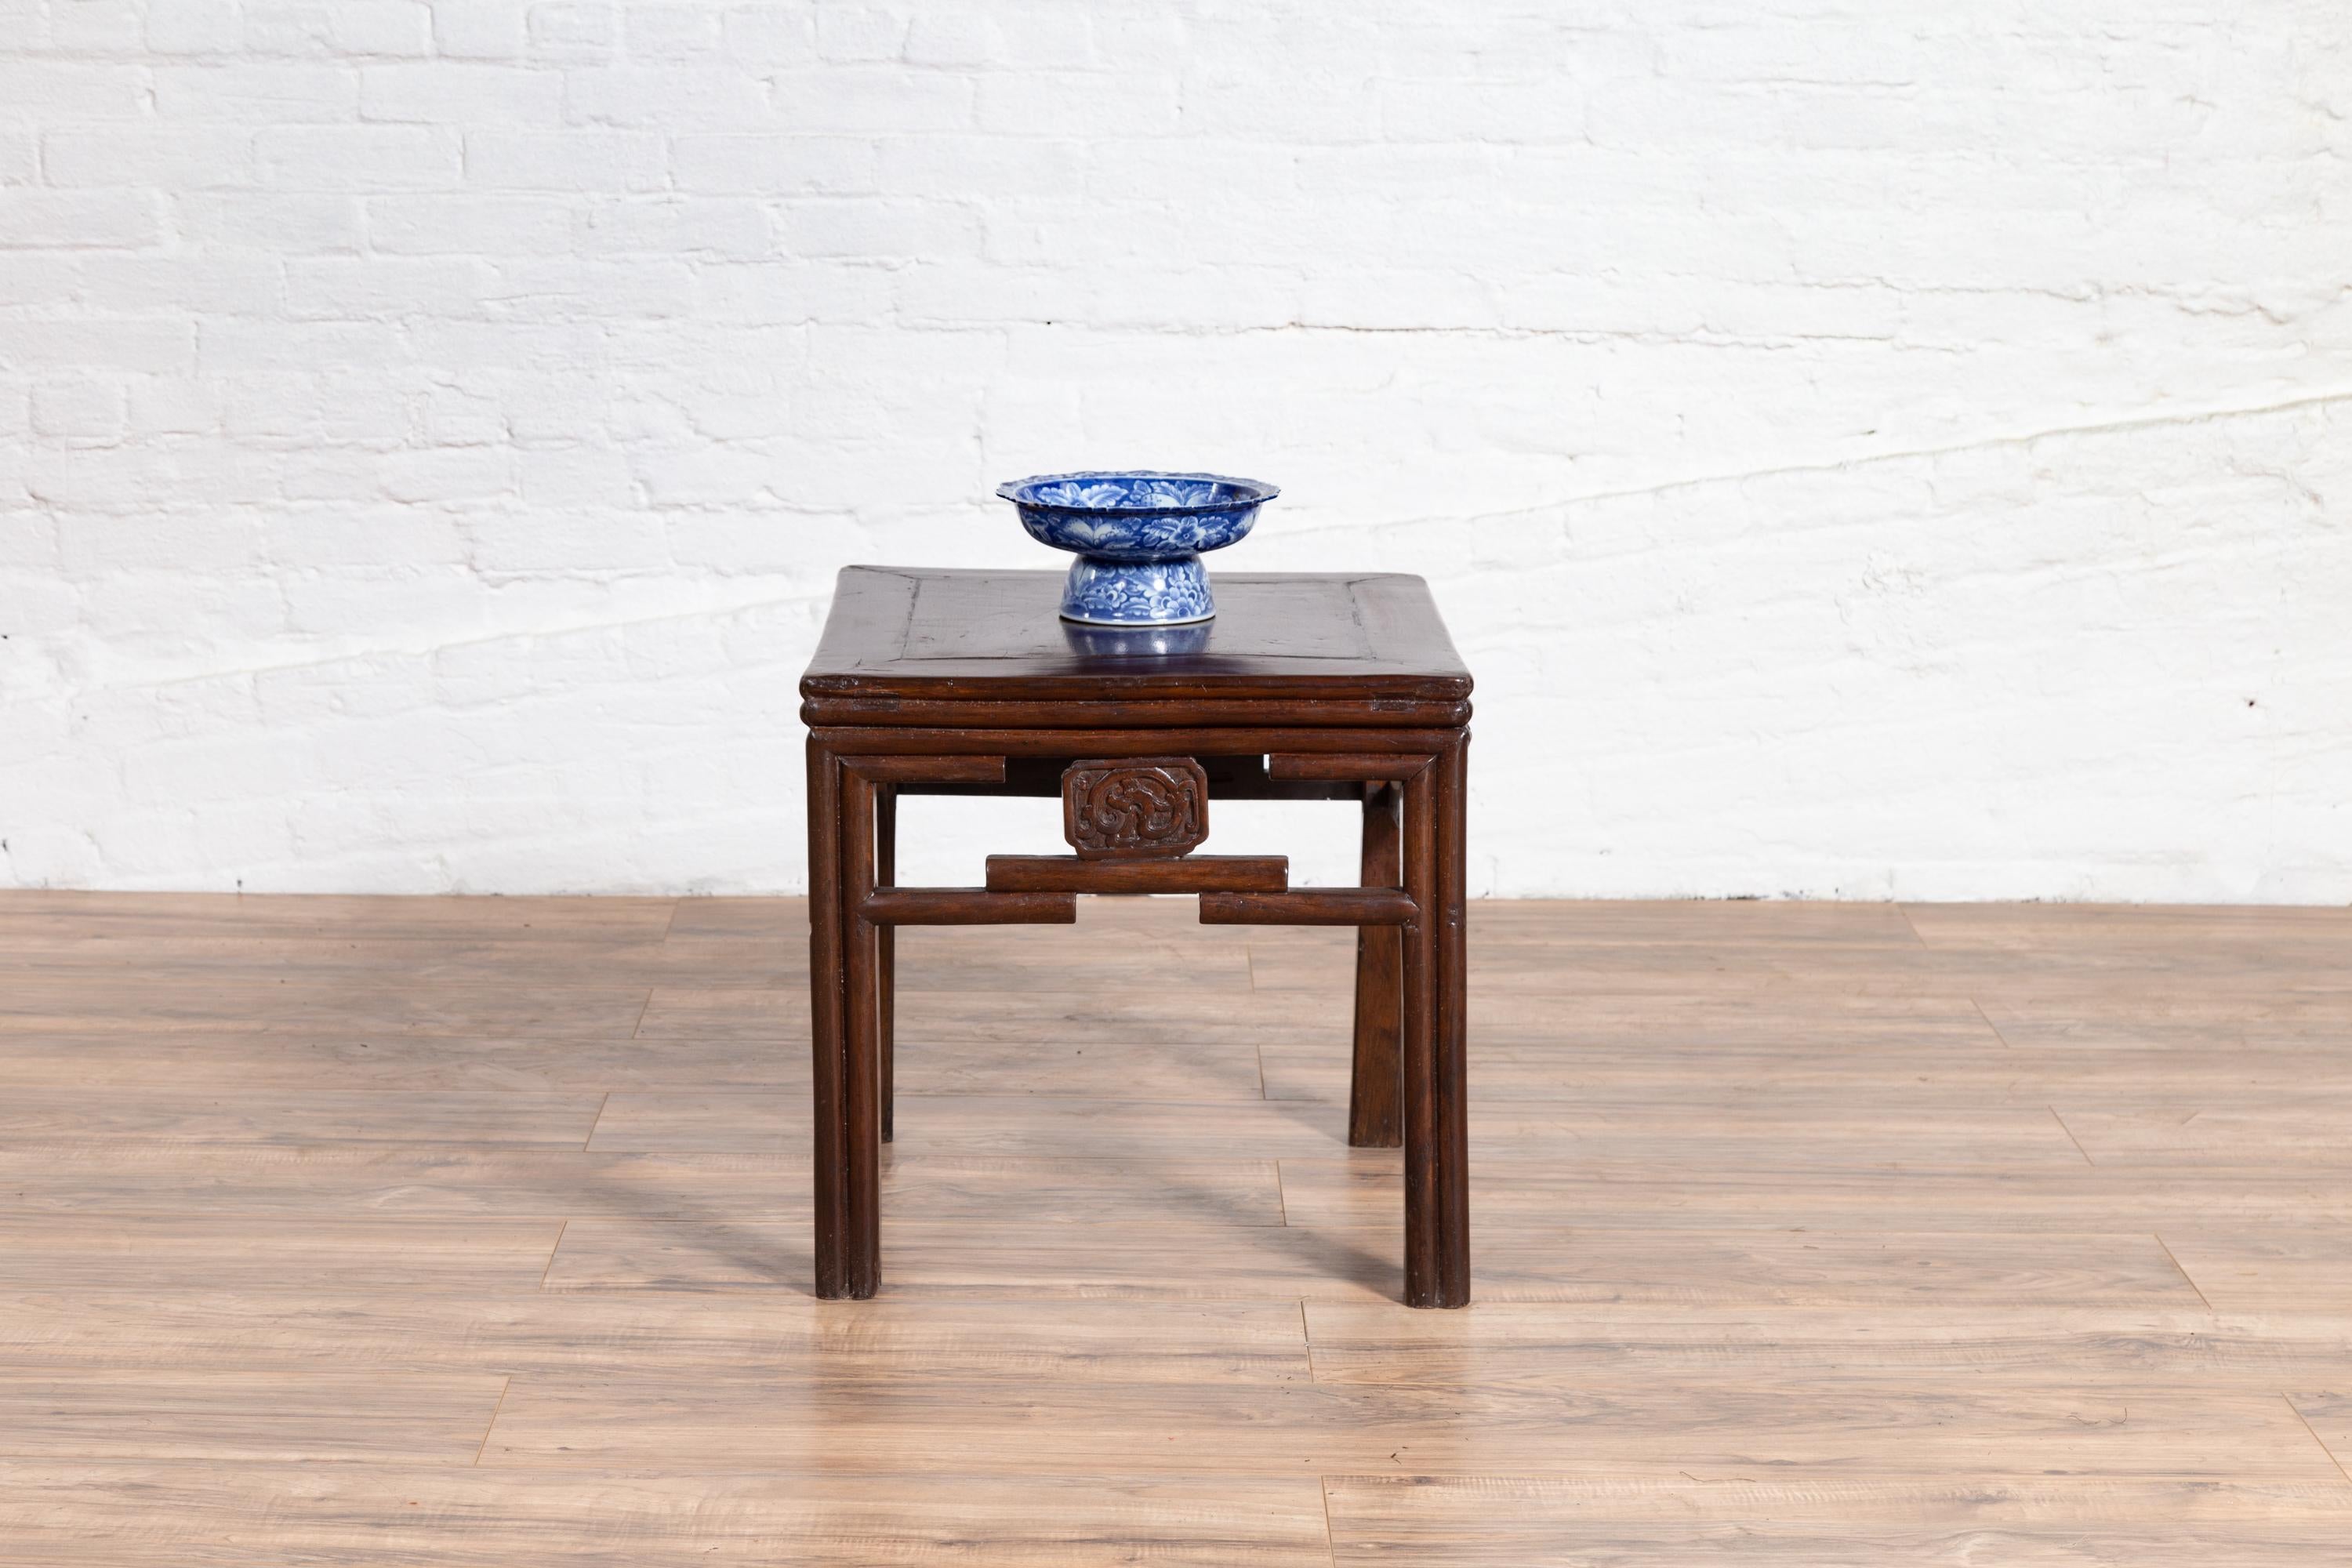 A Chinese vintage Qing dynasty style side table from the mid-20th century, with carved medallions and dark patina. Born in China during the mid-century period, this charming side table features a square planked top sitting above an open fretwork